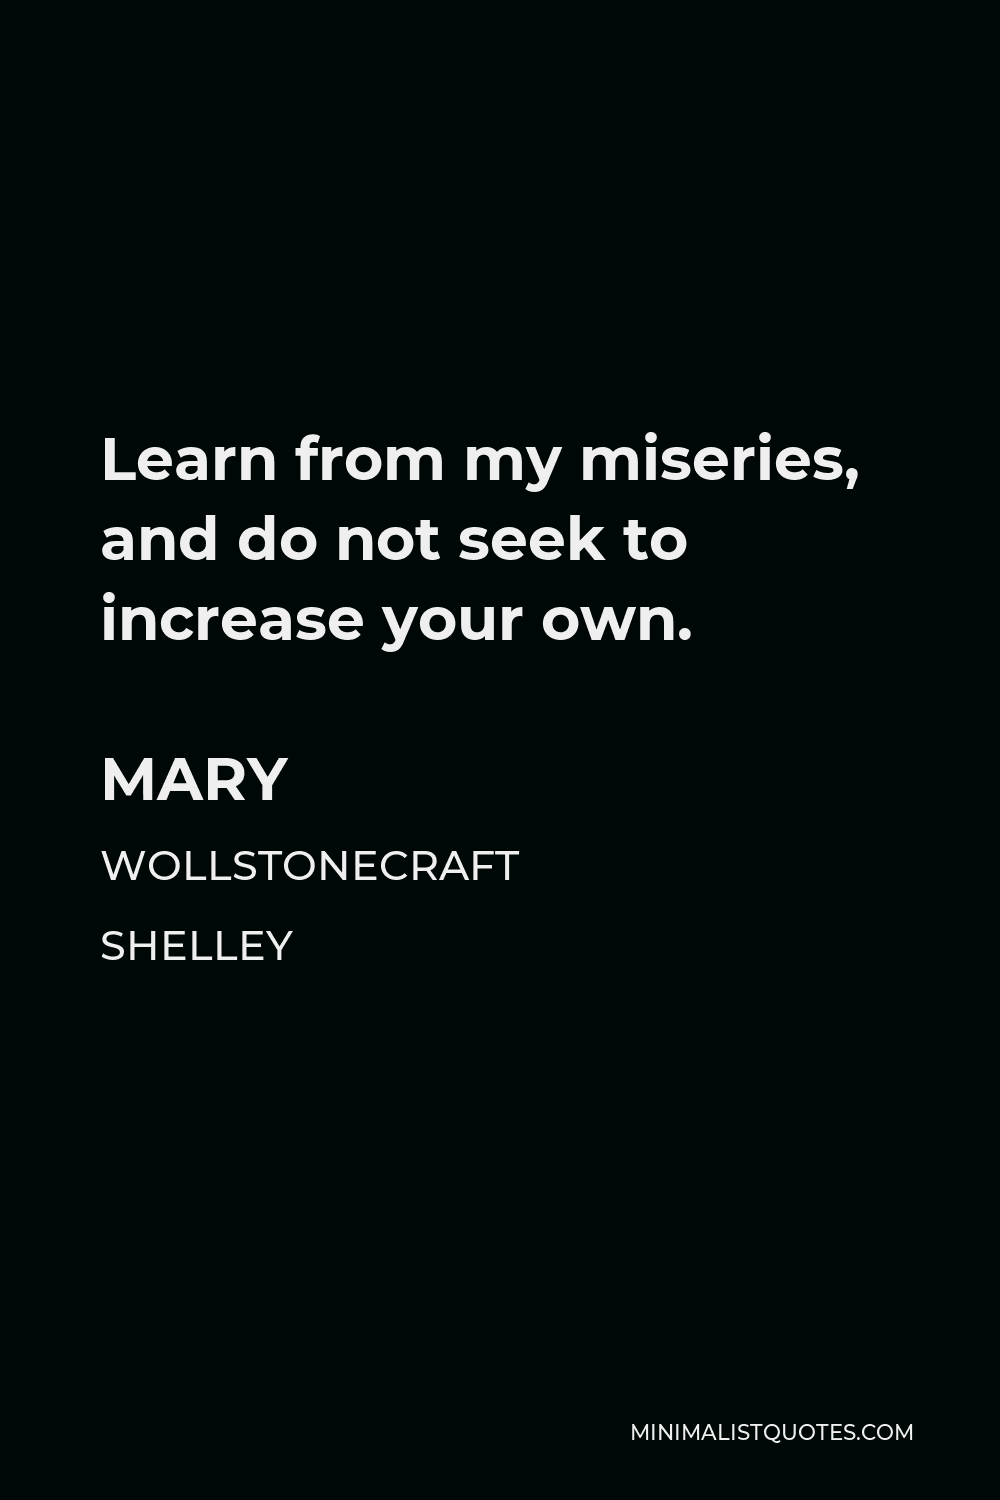 Mary Wollstonecraft Shelley Quote - Learn from my miseries, and do not seek to increase your own.